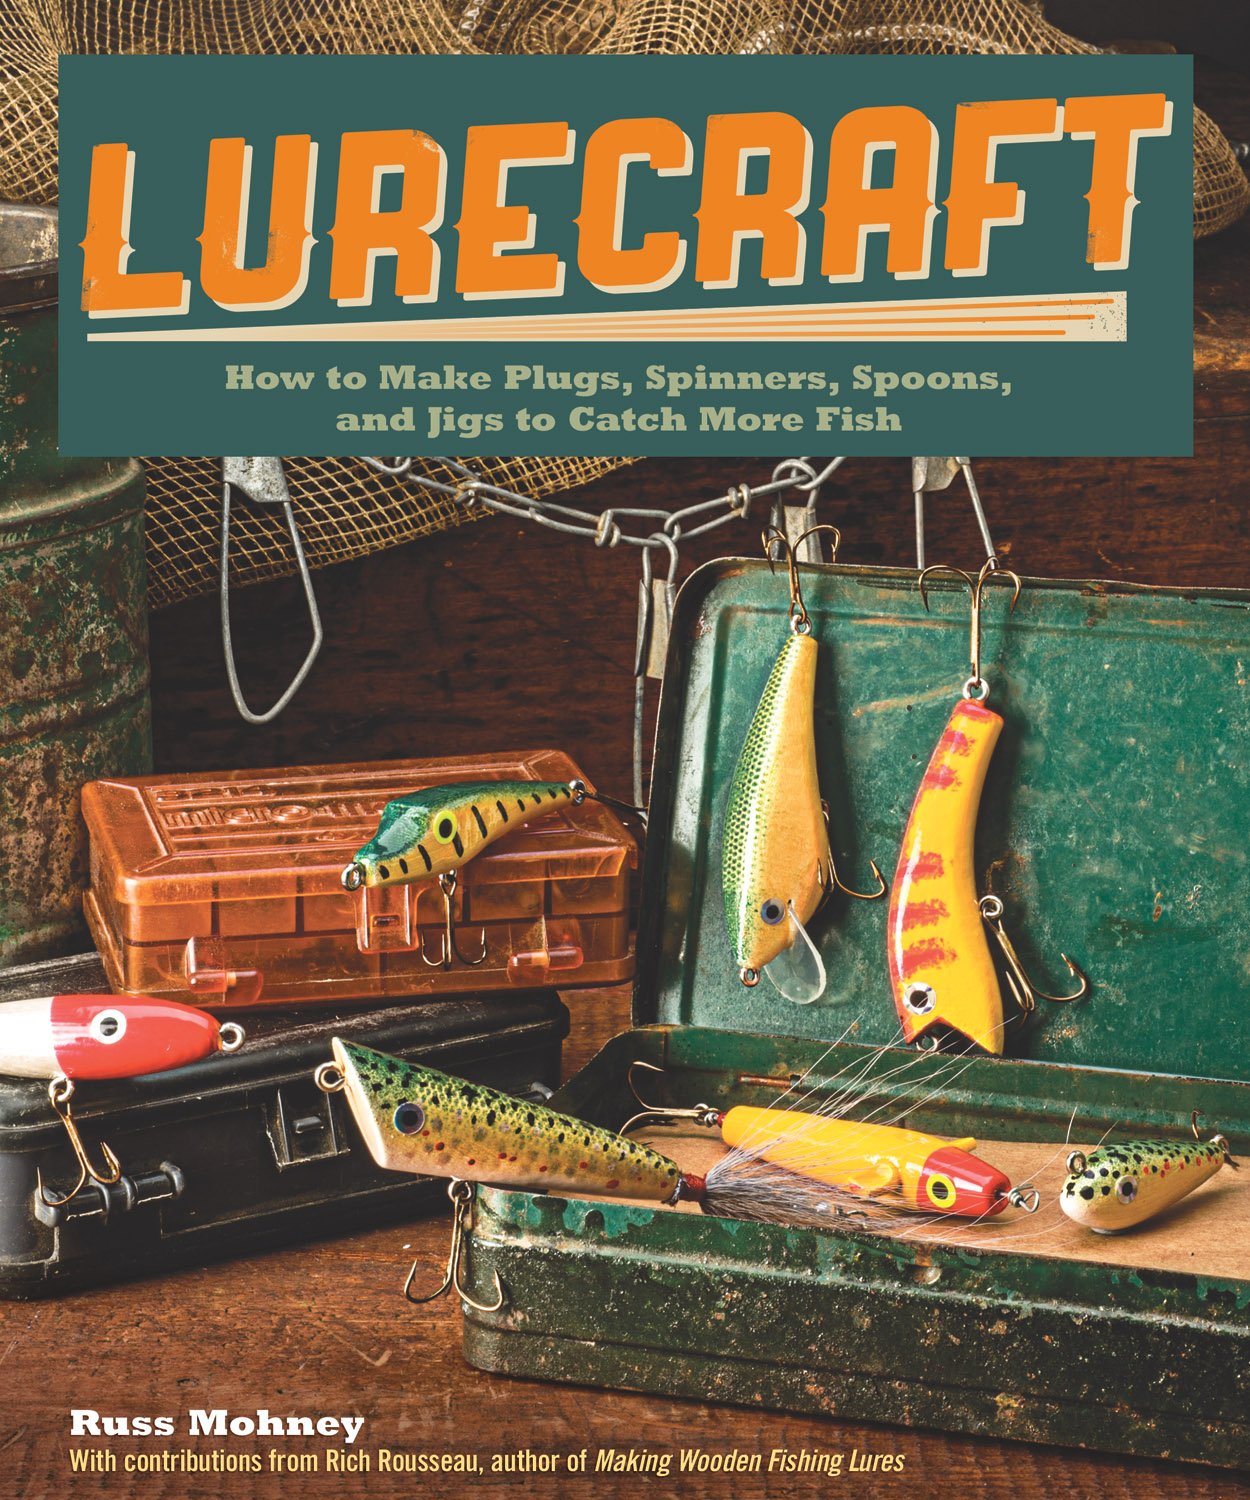 Lurecraft: How to Make Plugs, Spinners, Spoons, and Jigs to Catch